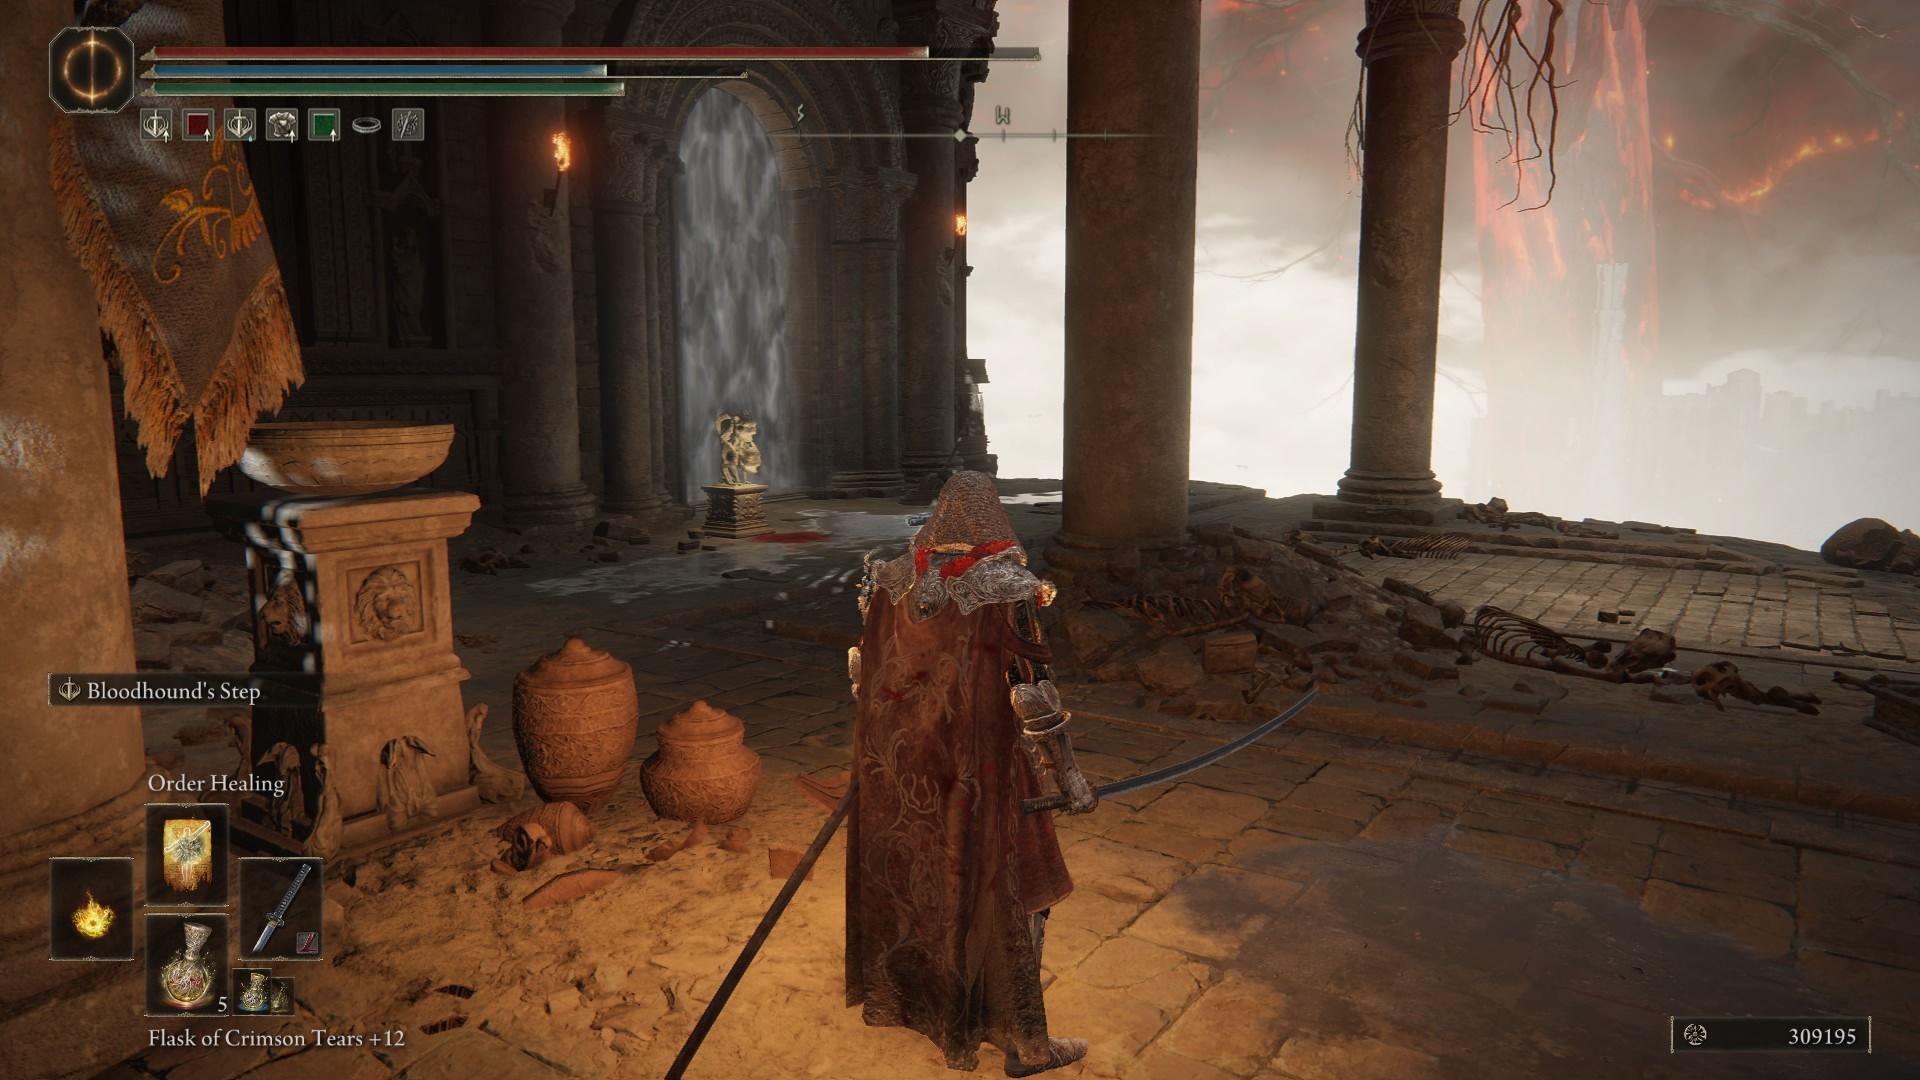 The player looking at the Imp Statue inside the building.